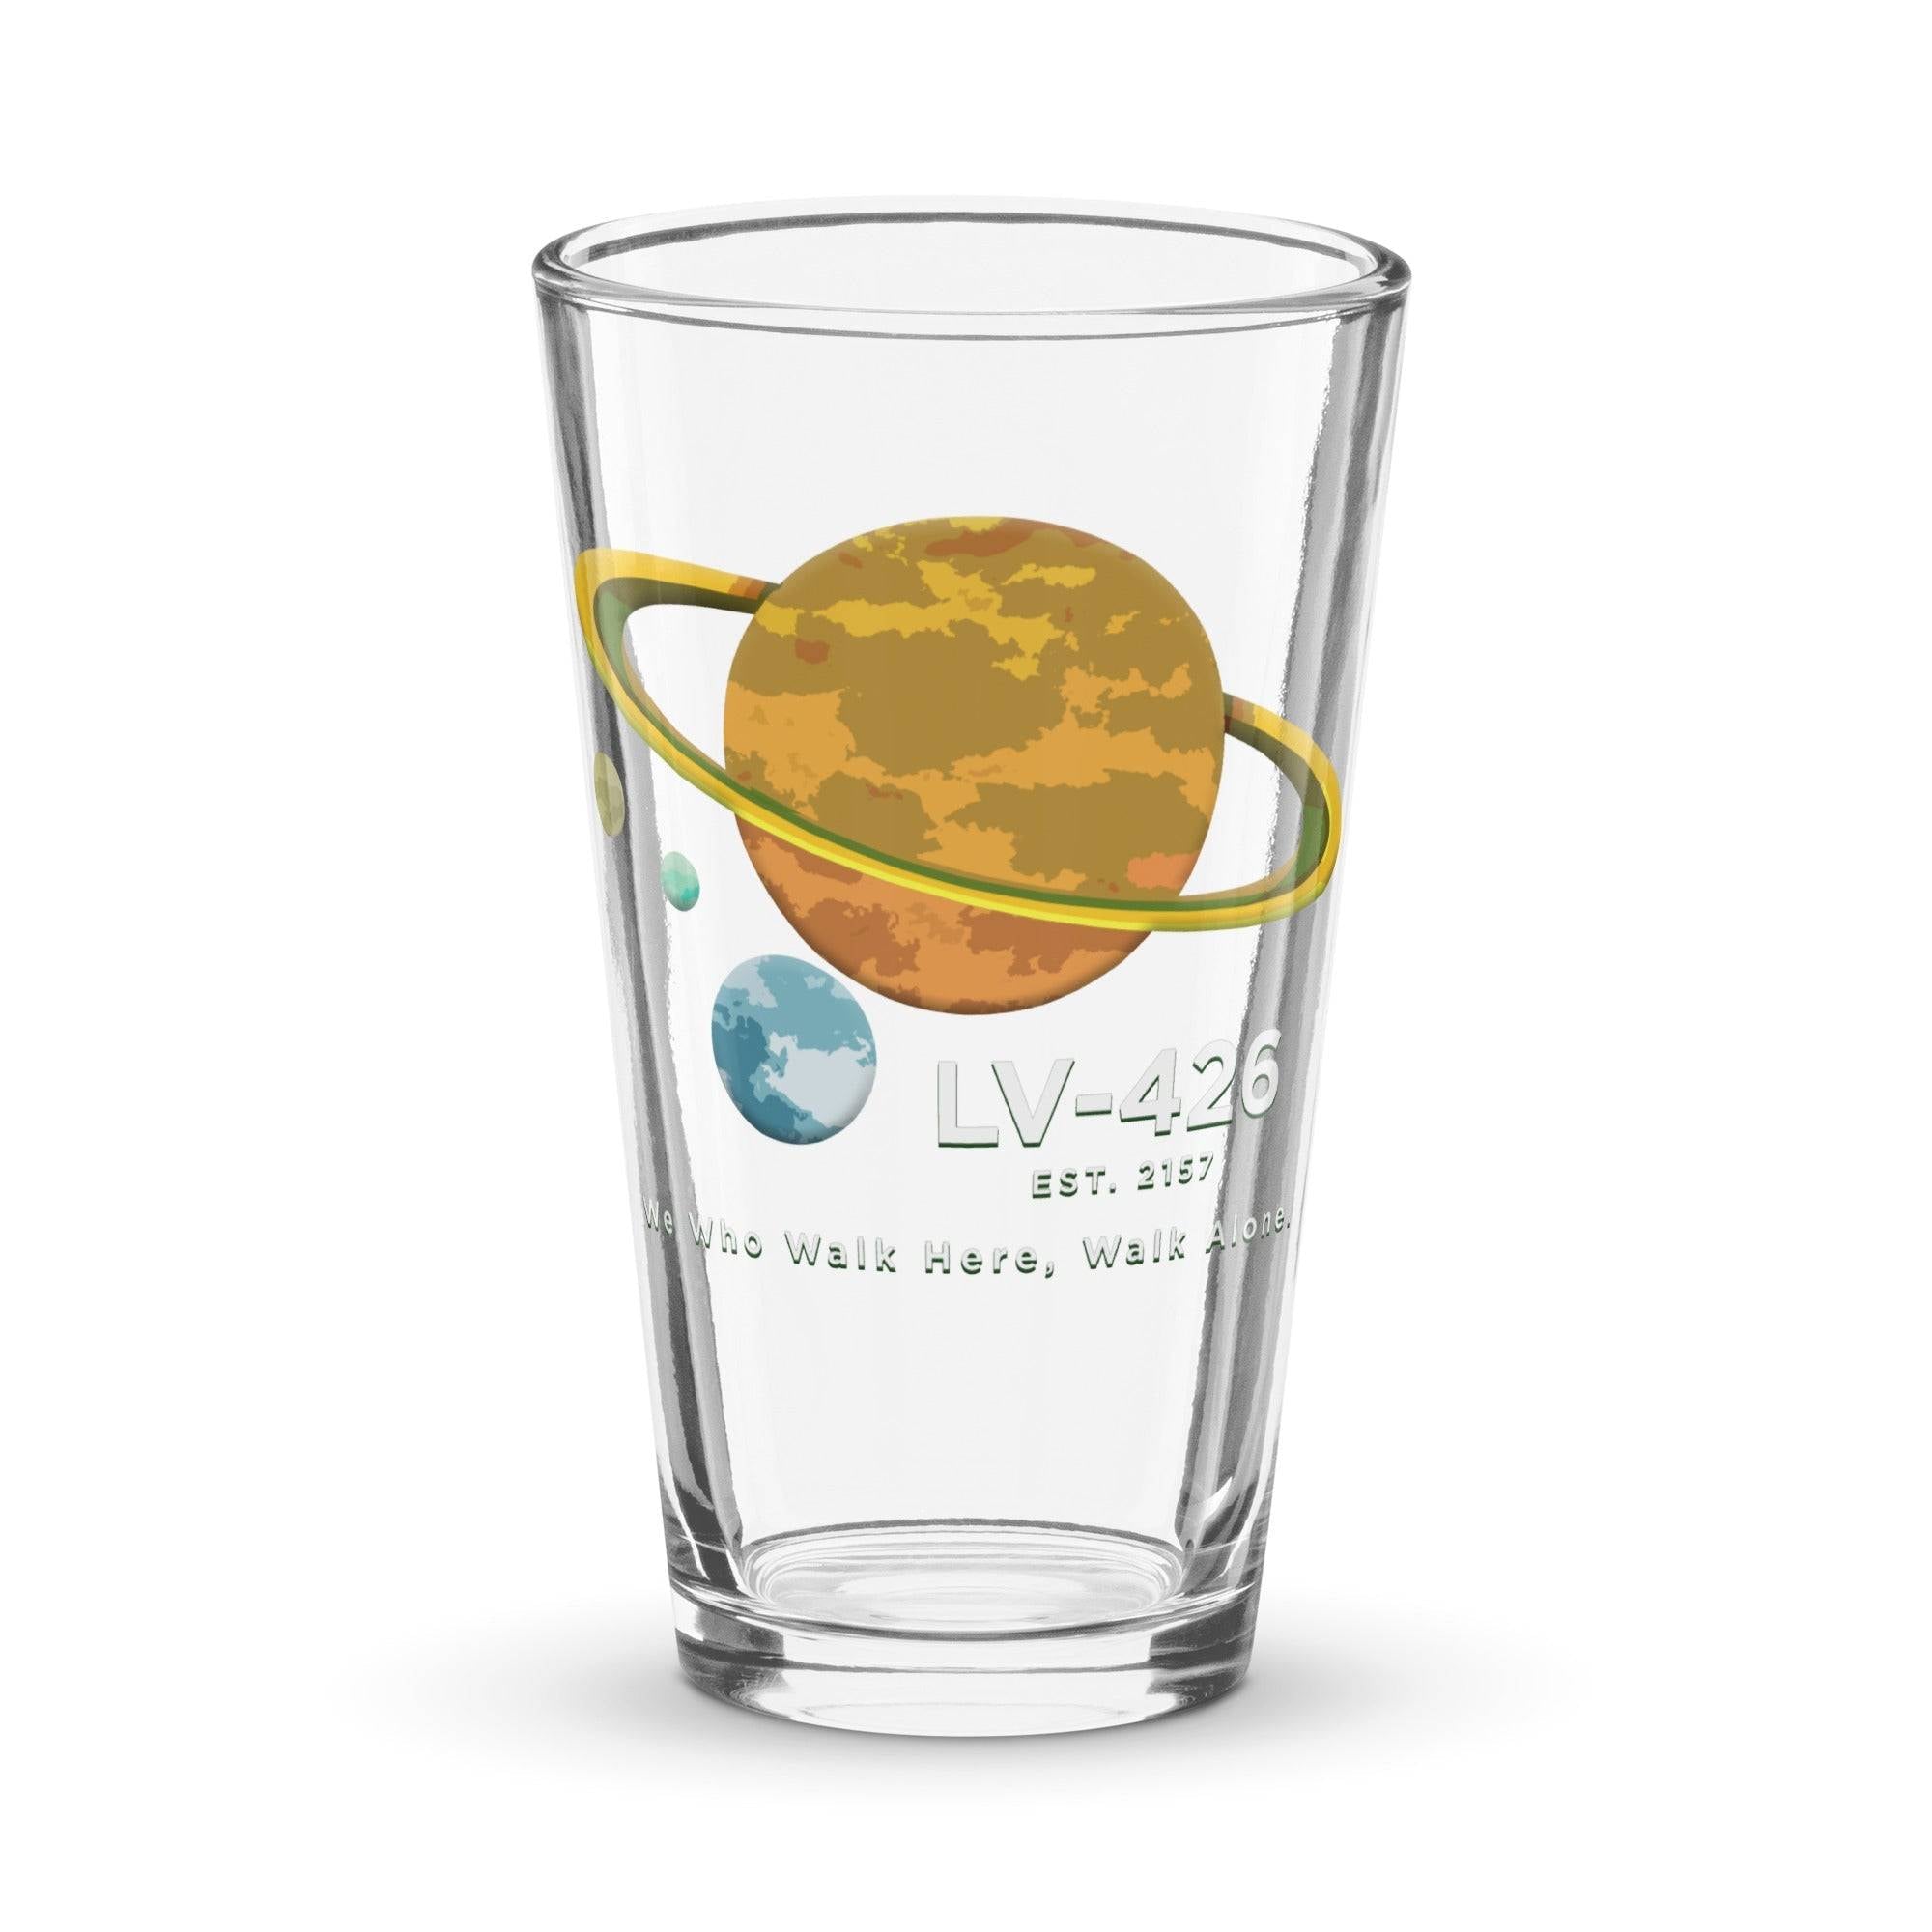 a glass with a picture of the planets on it